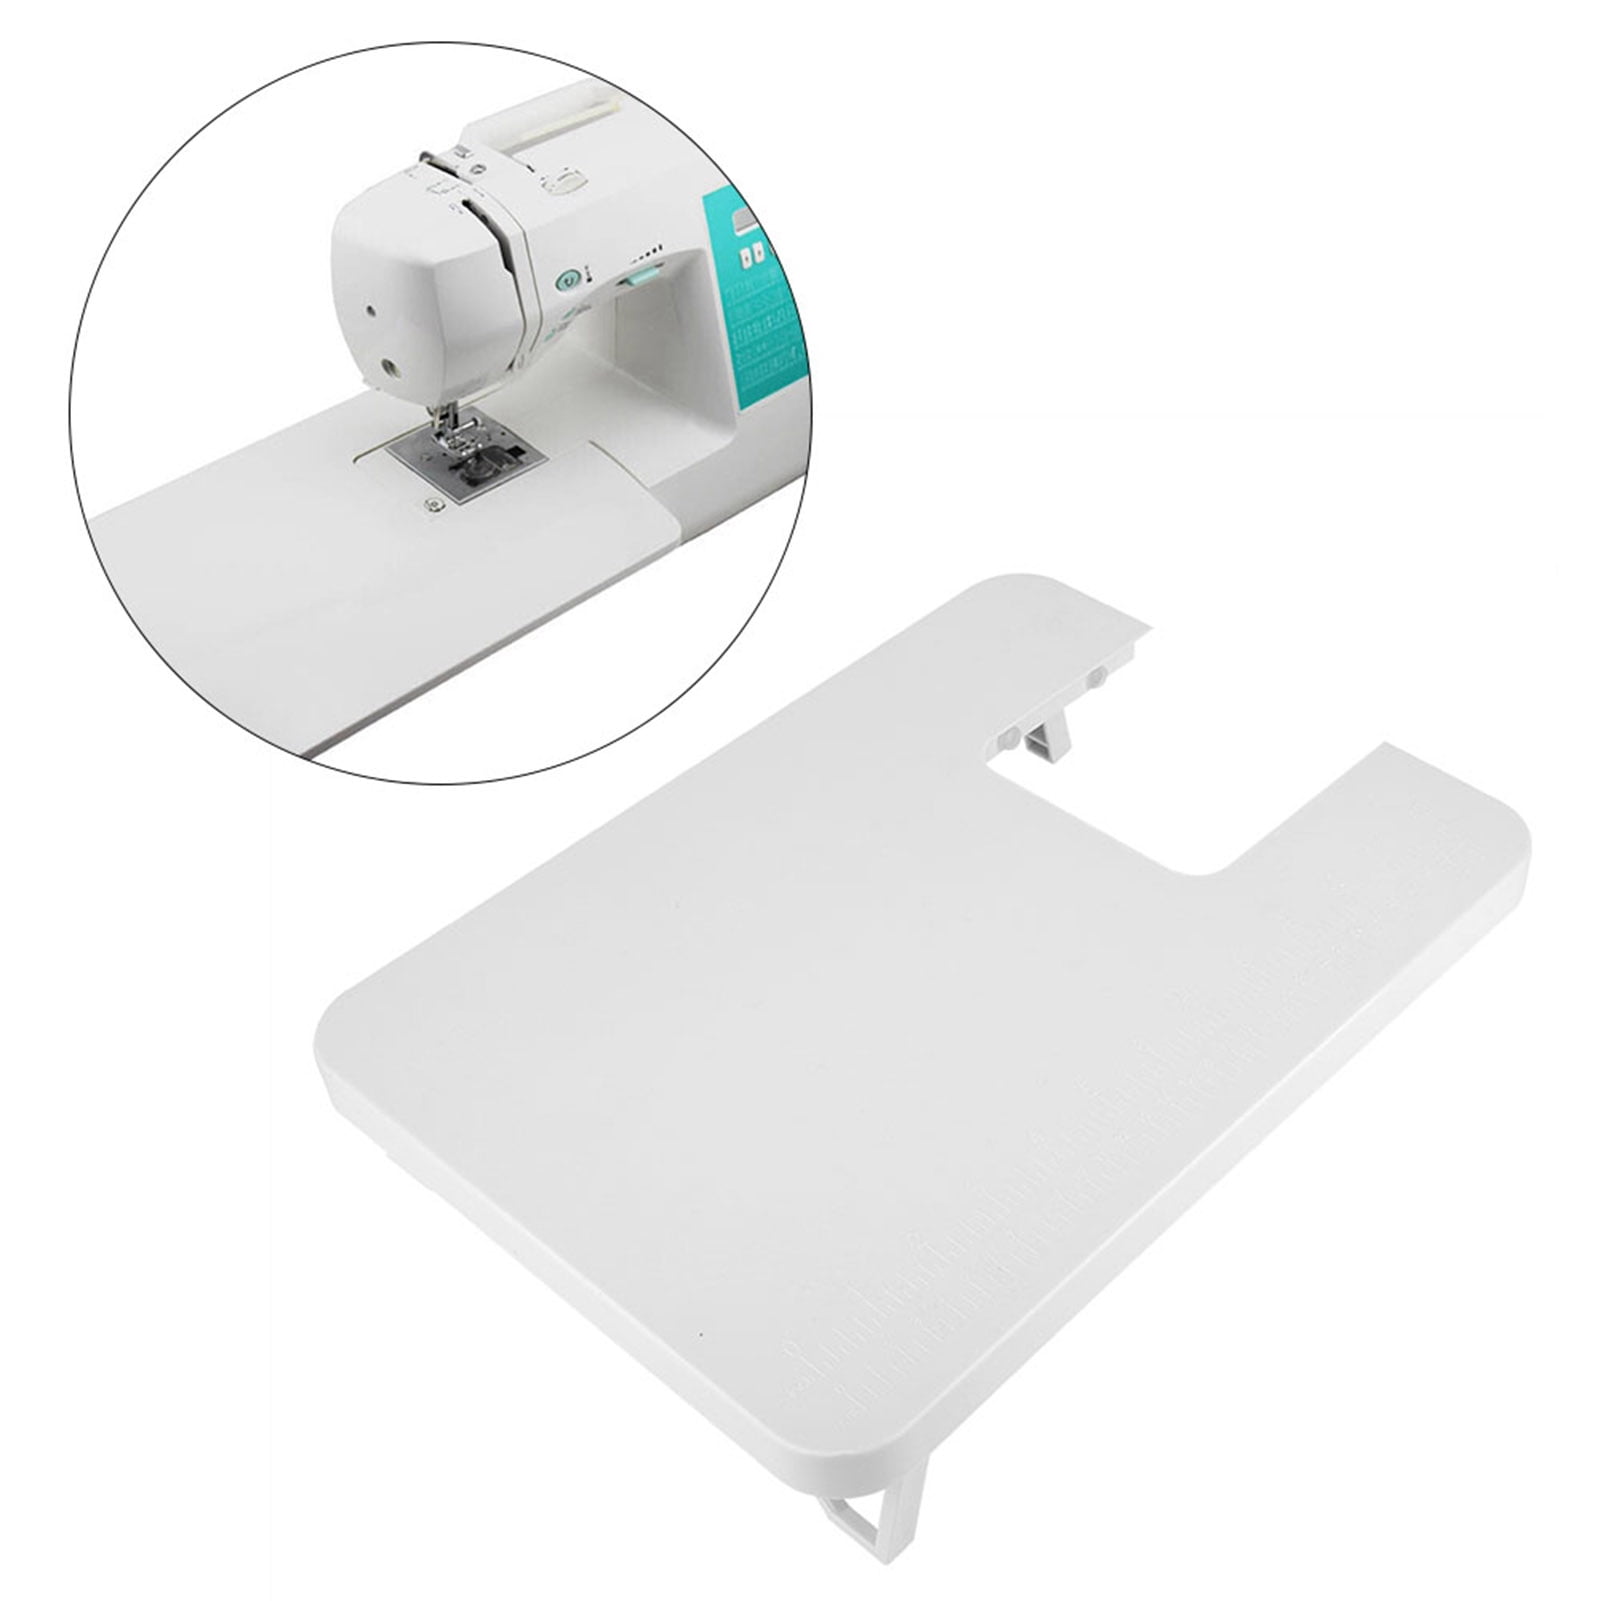 Loewten Extension Table, 35.5*25.3*2cm/13.9*9.9*0.78inch Sewing